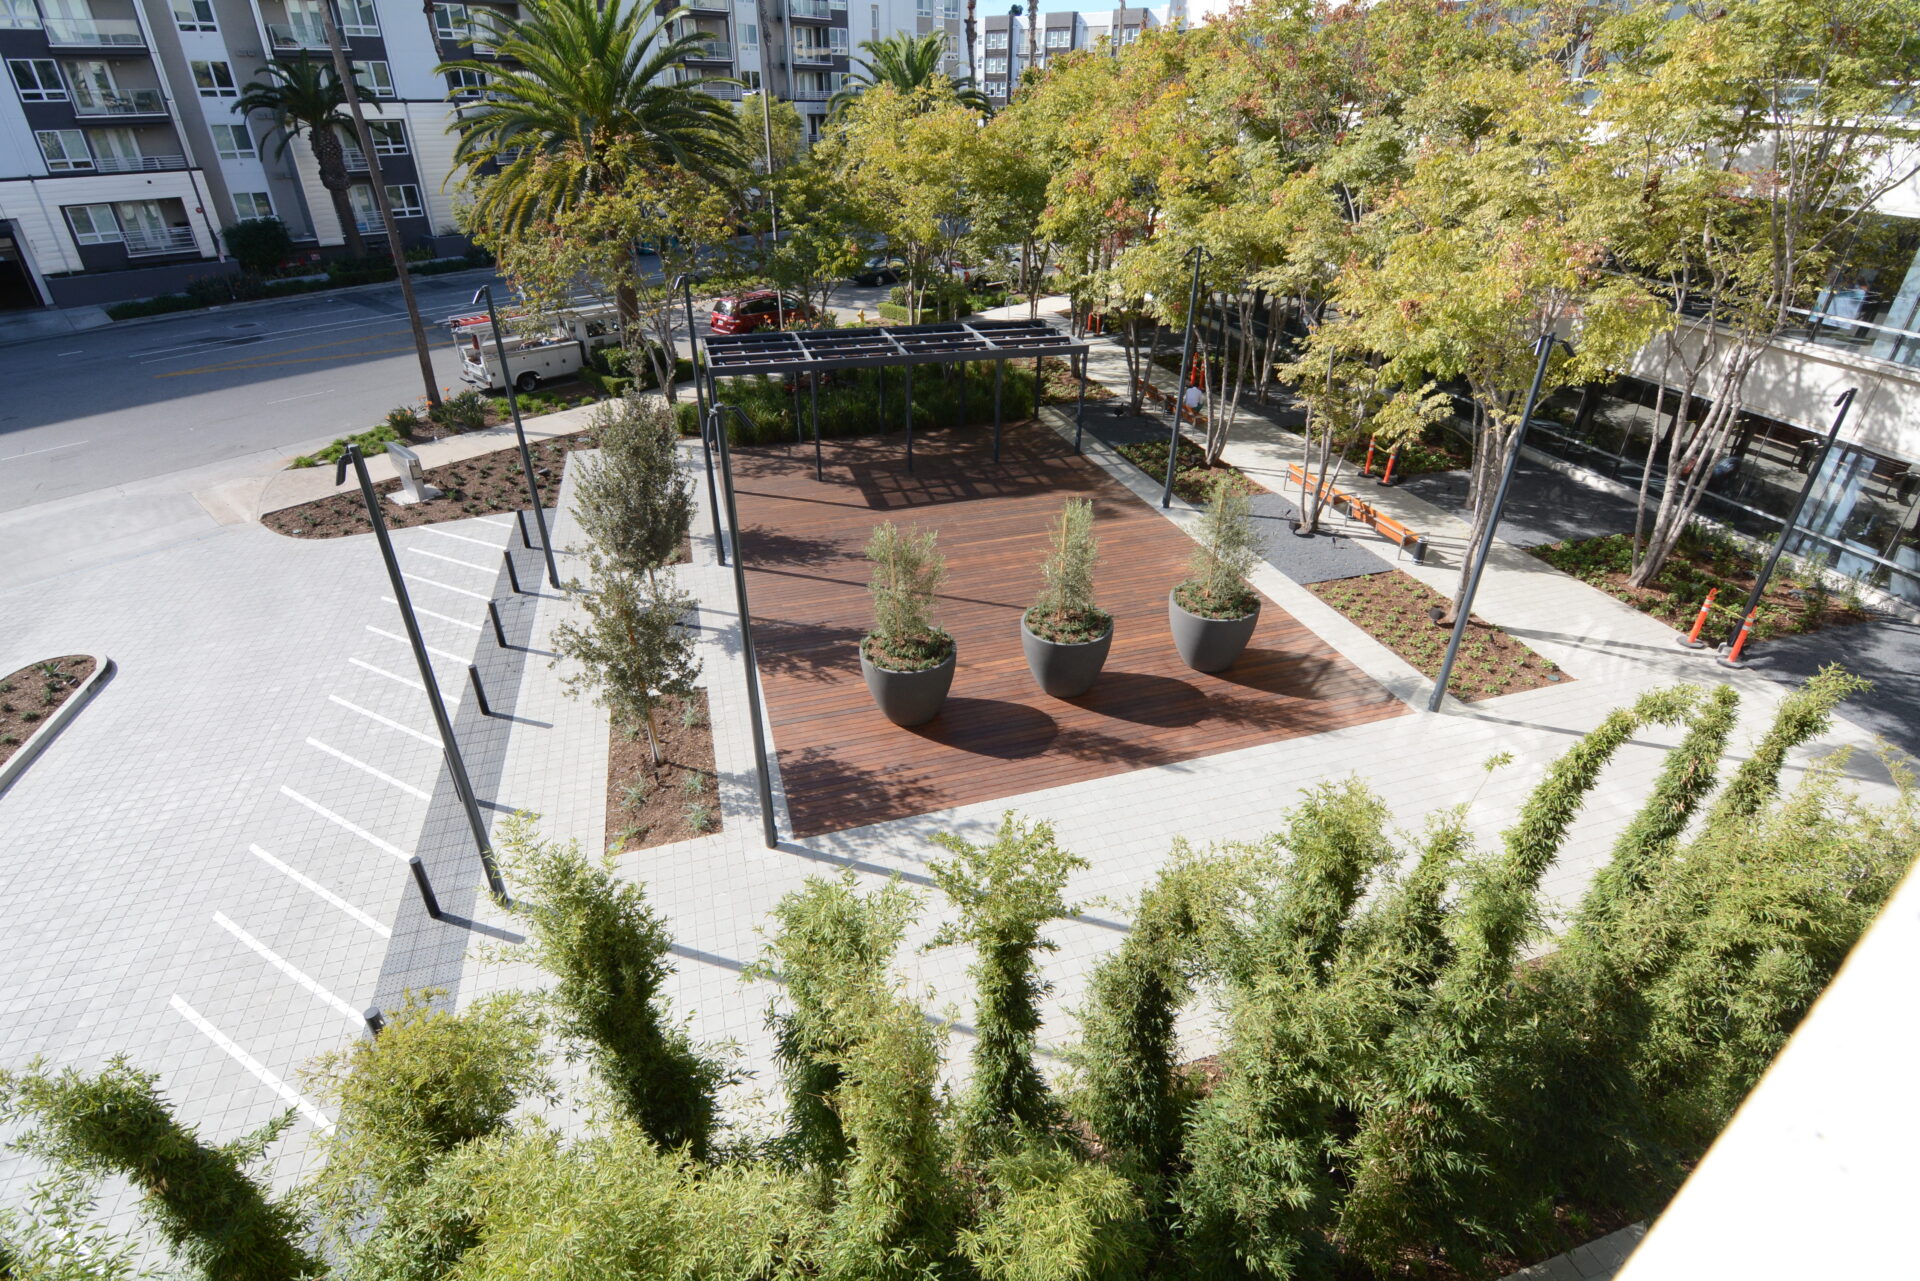 A commercial outdoor space with plants